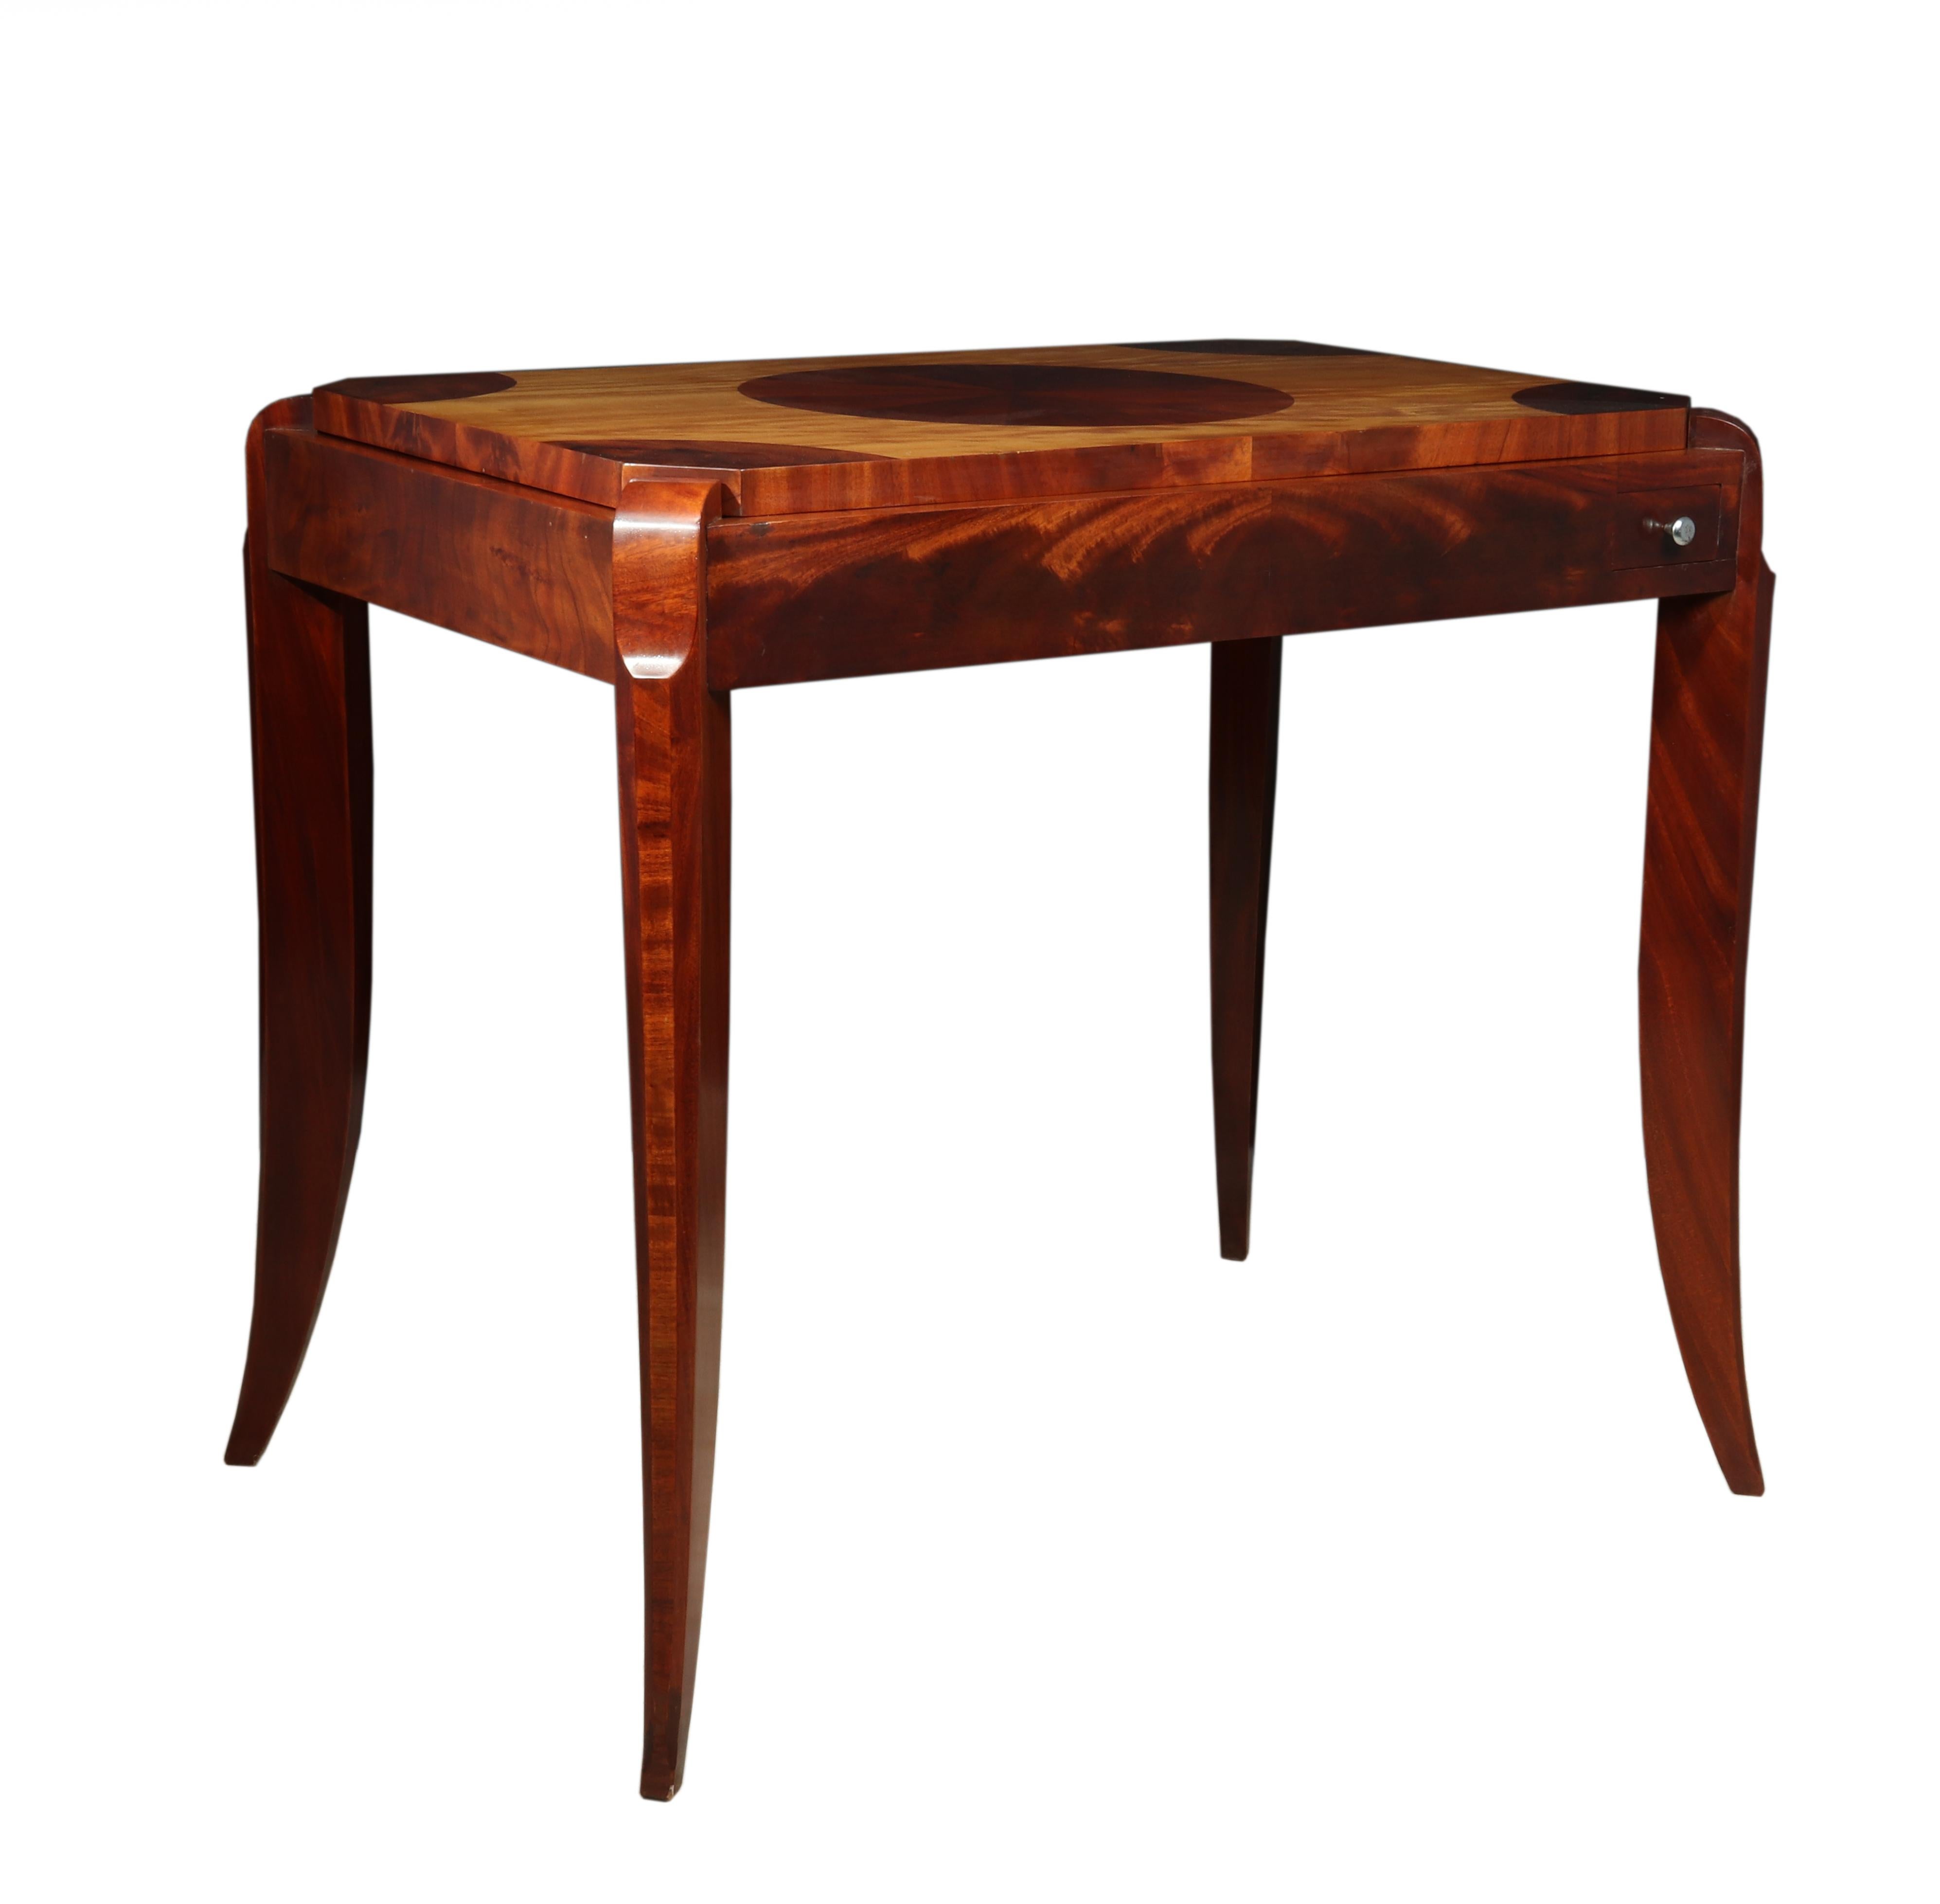 Art Deco mahogany and satinwood games table, circa 1925
This is an original French, Art Deco games table from 1925. With beautifully shaped Sabre legs, made from mahogany and satinwood. There is a segmented center circle and a chess board to the